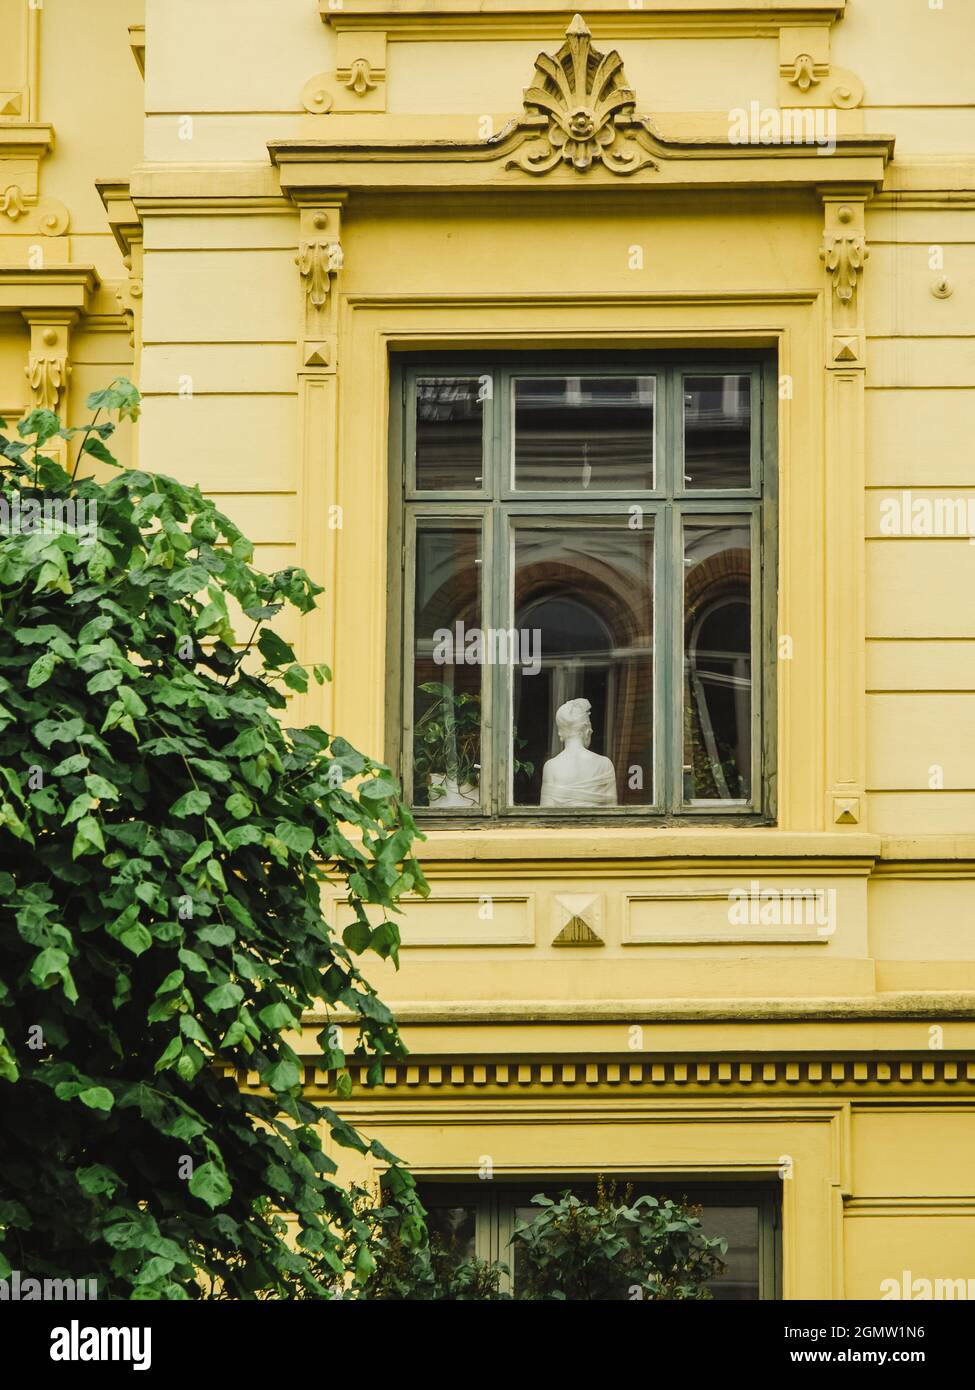 marble bust in the window of old european building. marble bust the goddess with her head turned out from the window, view from outside of building Stock Photo